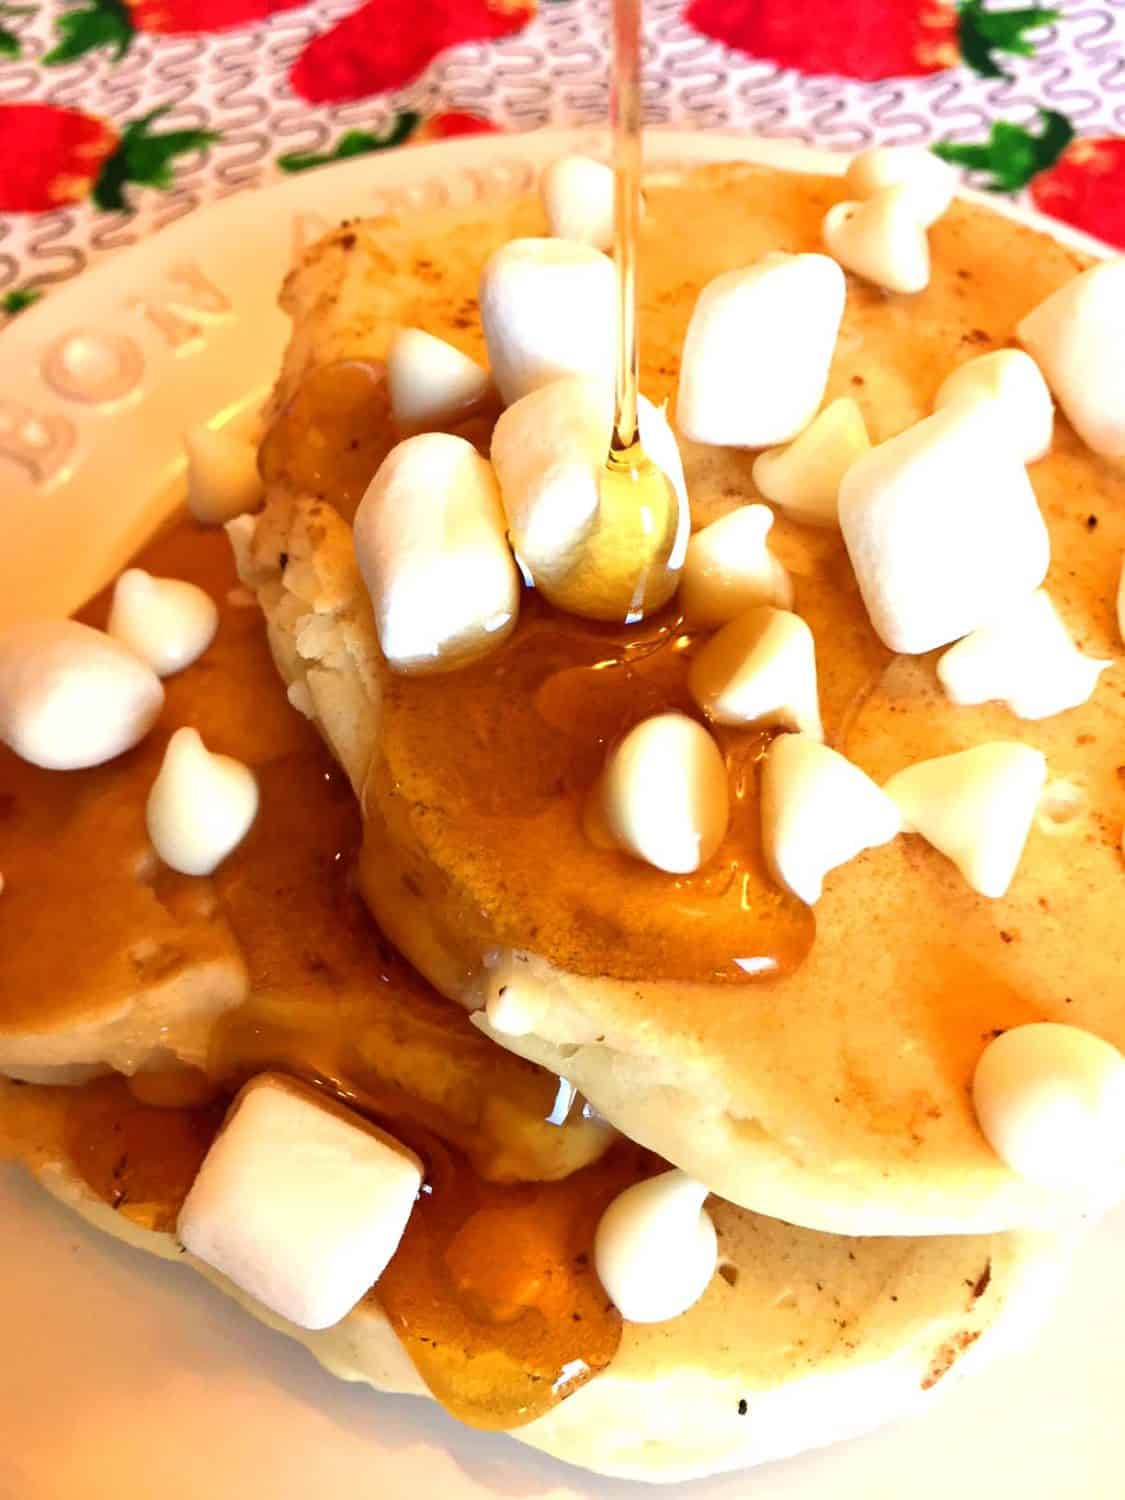 Marshmallow Pancakes With White Chocolate Chips.
